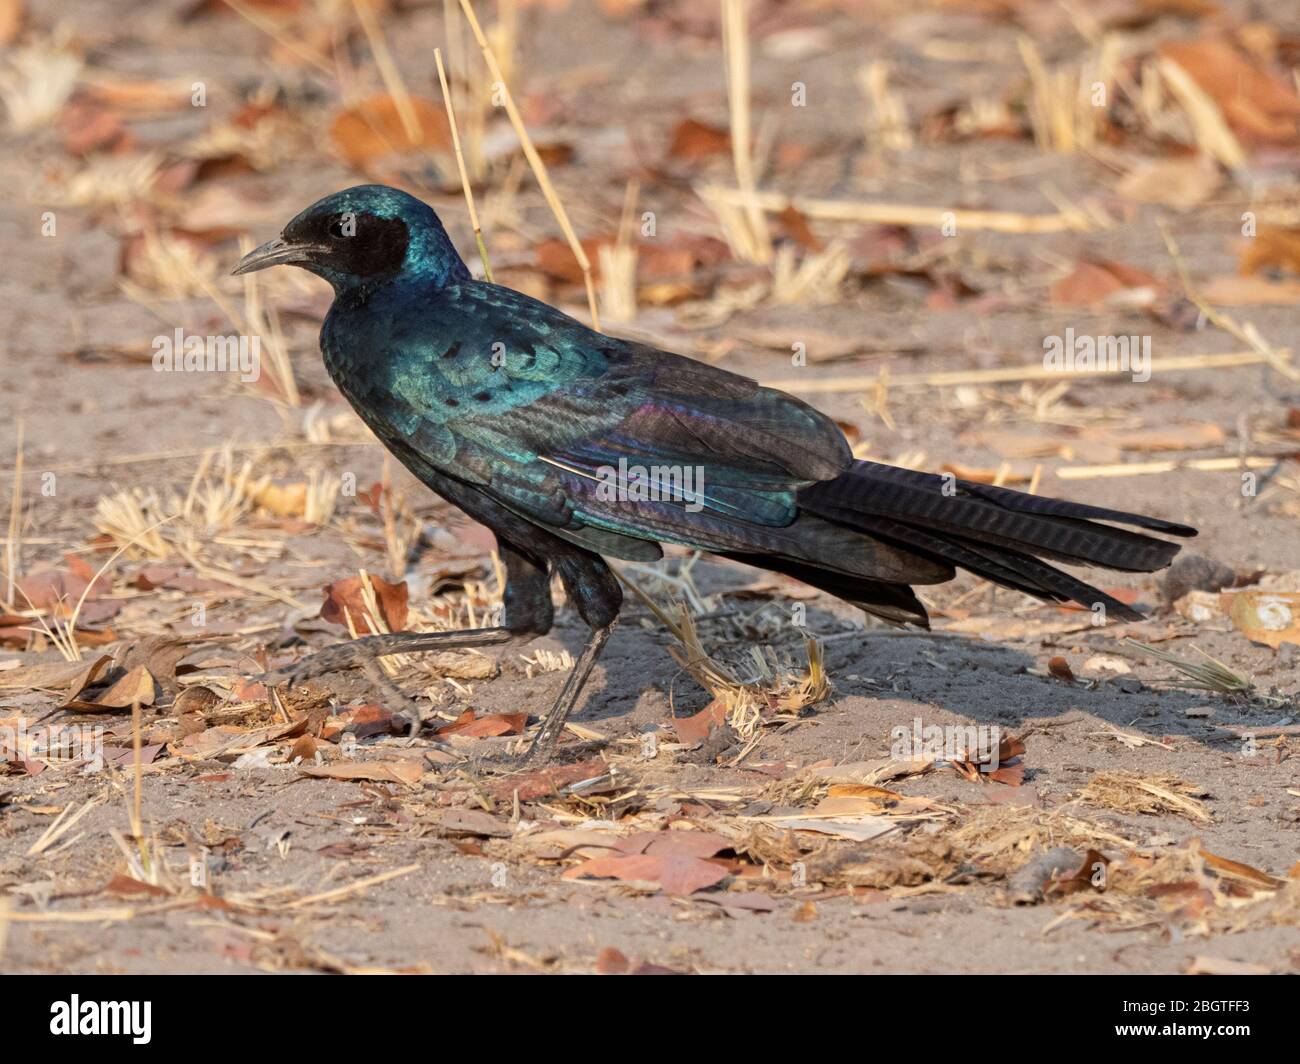 Adult Burchell's starling, Lamprotornis australis, in Chobe National Park, Botswana, South Africa. Stock Photo